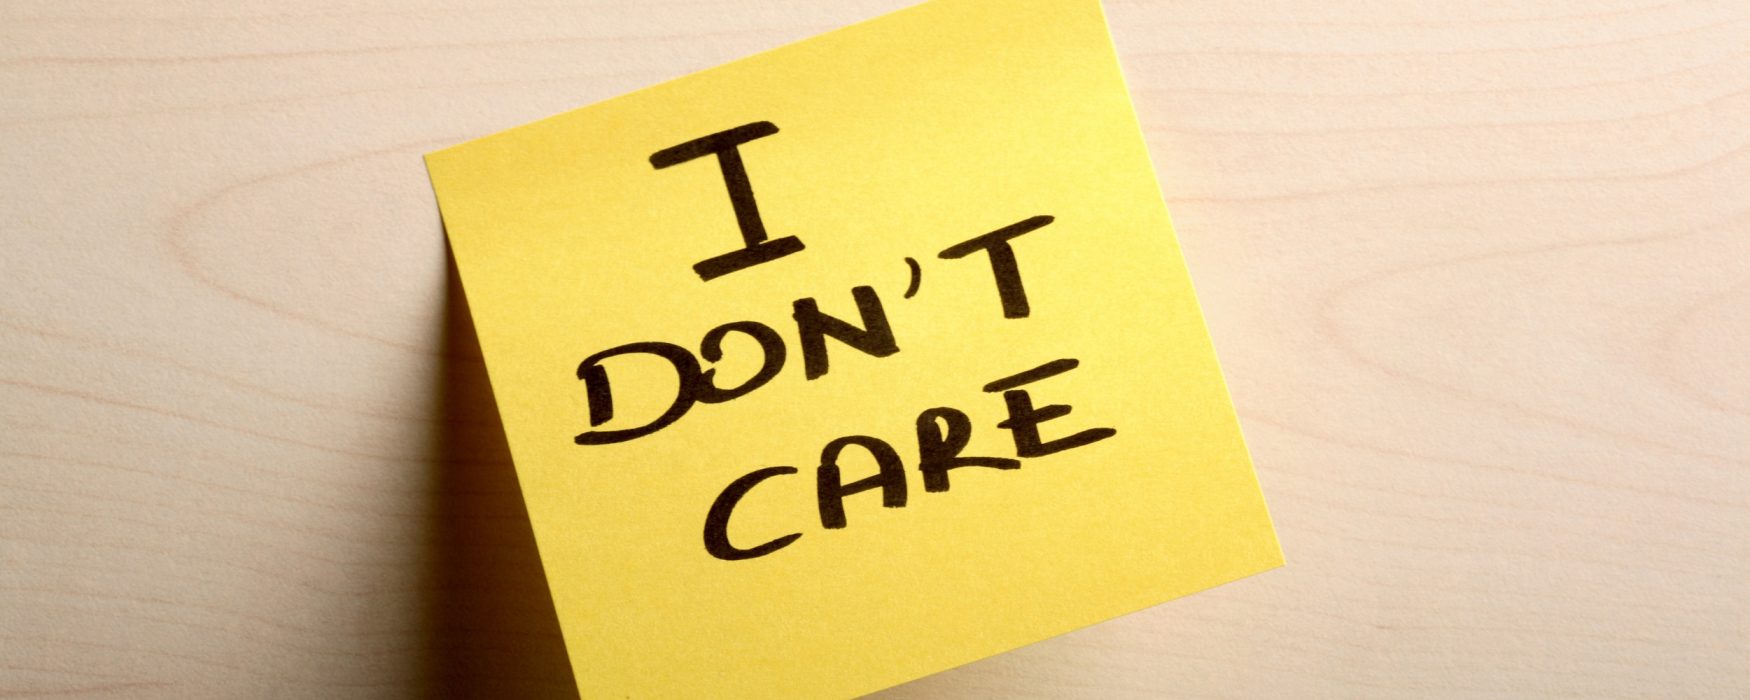 Post-it note with the words "I don't care" written on it.